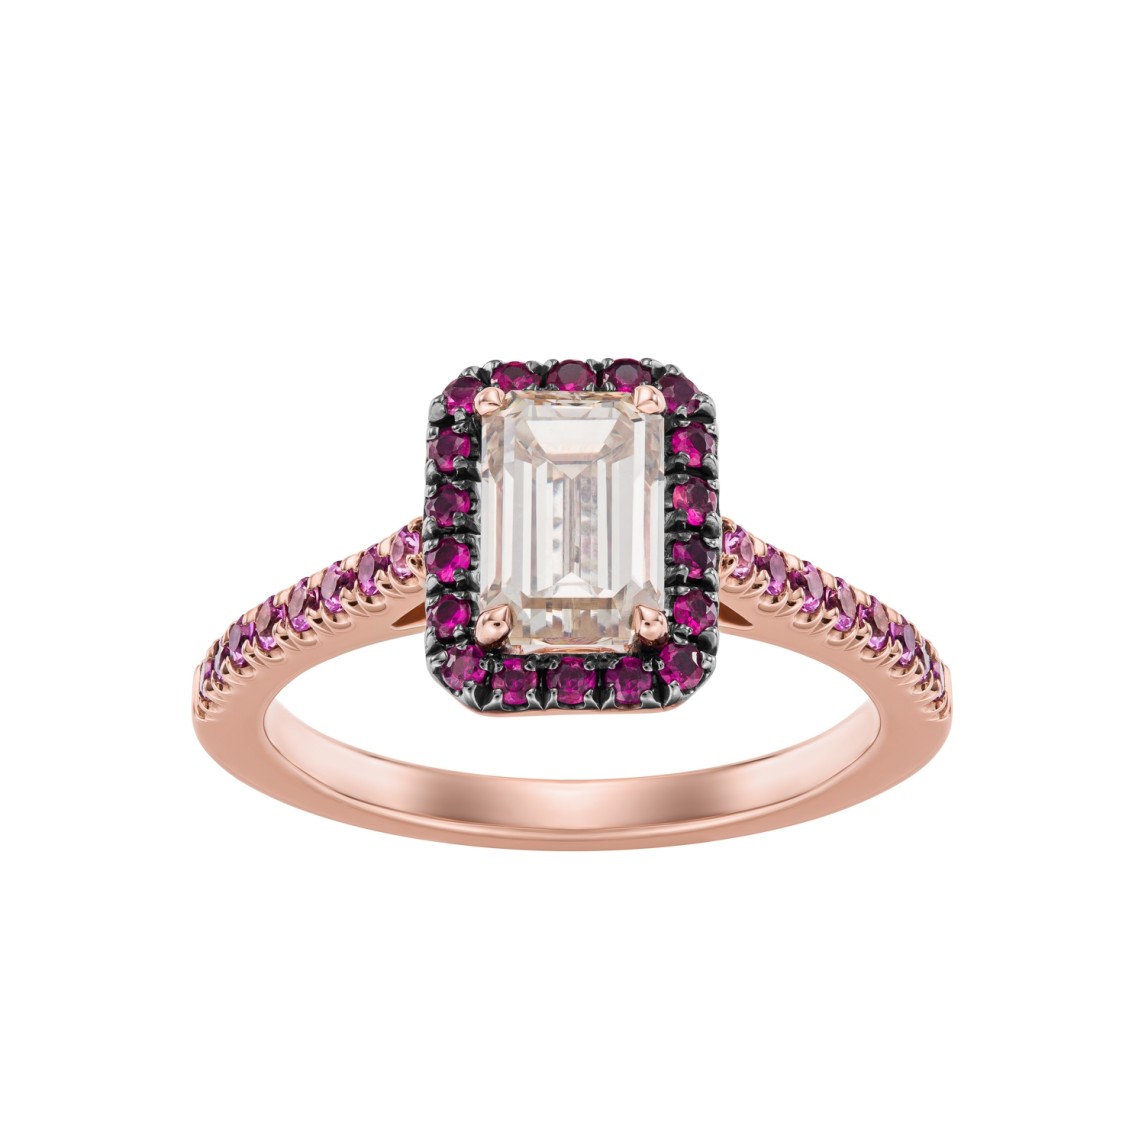 Rose Gold Ring With Diamond, Rubies And Pink Sapphires